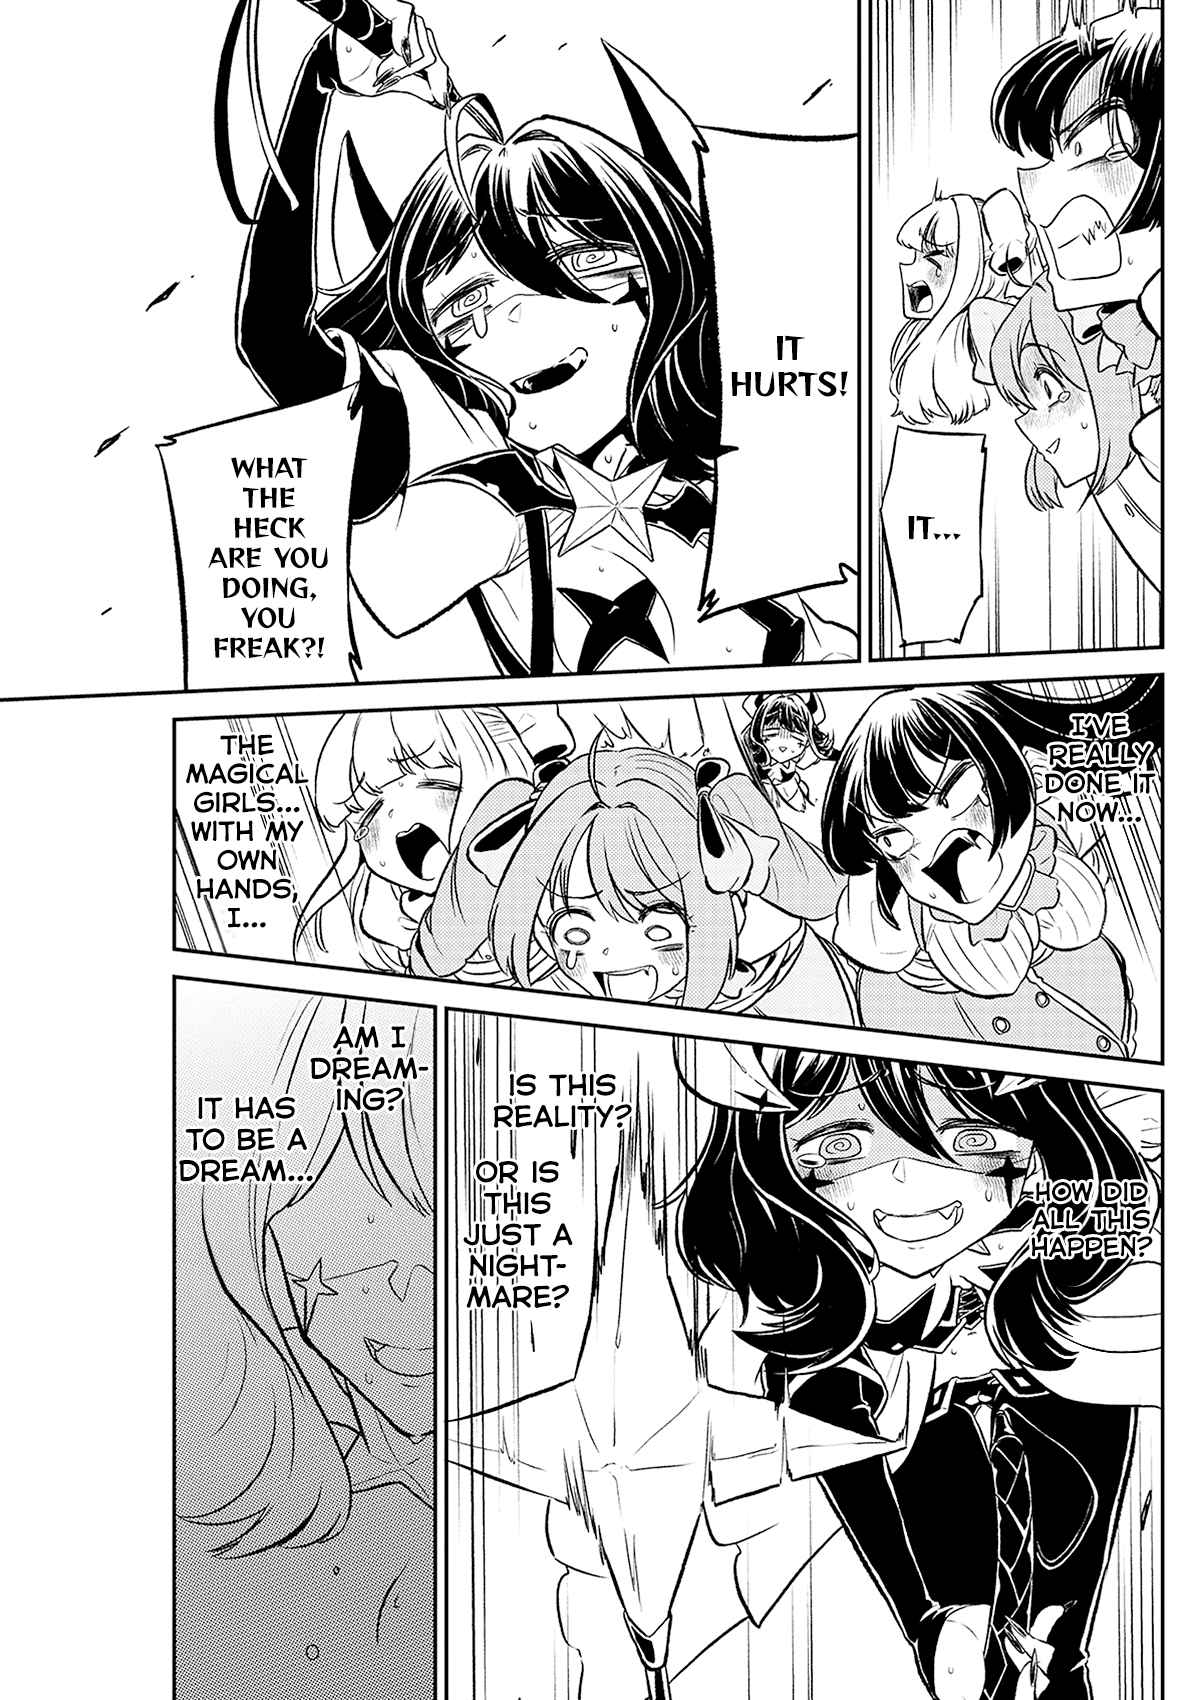 Looking up to Magical Girls Vol. 1 Ch. 1